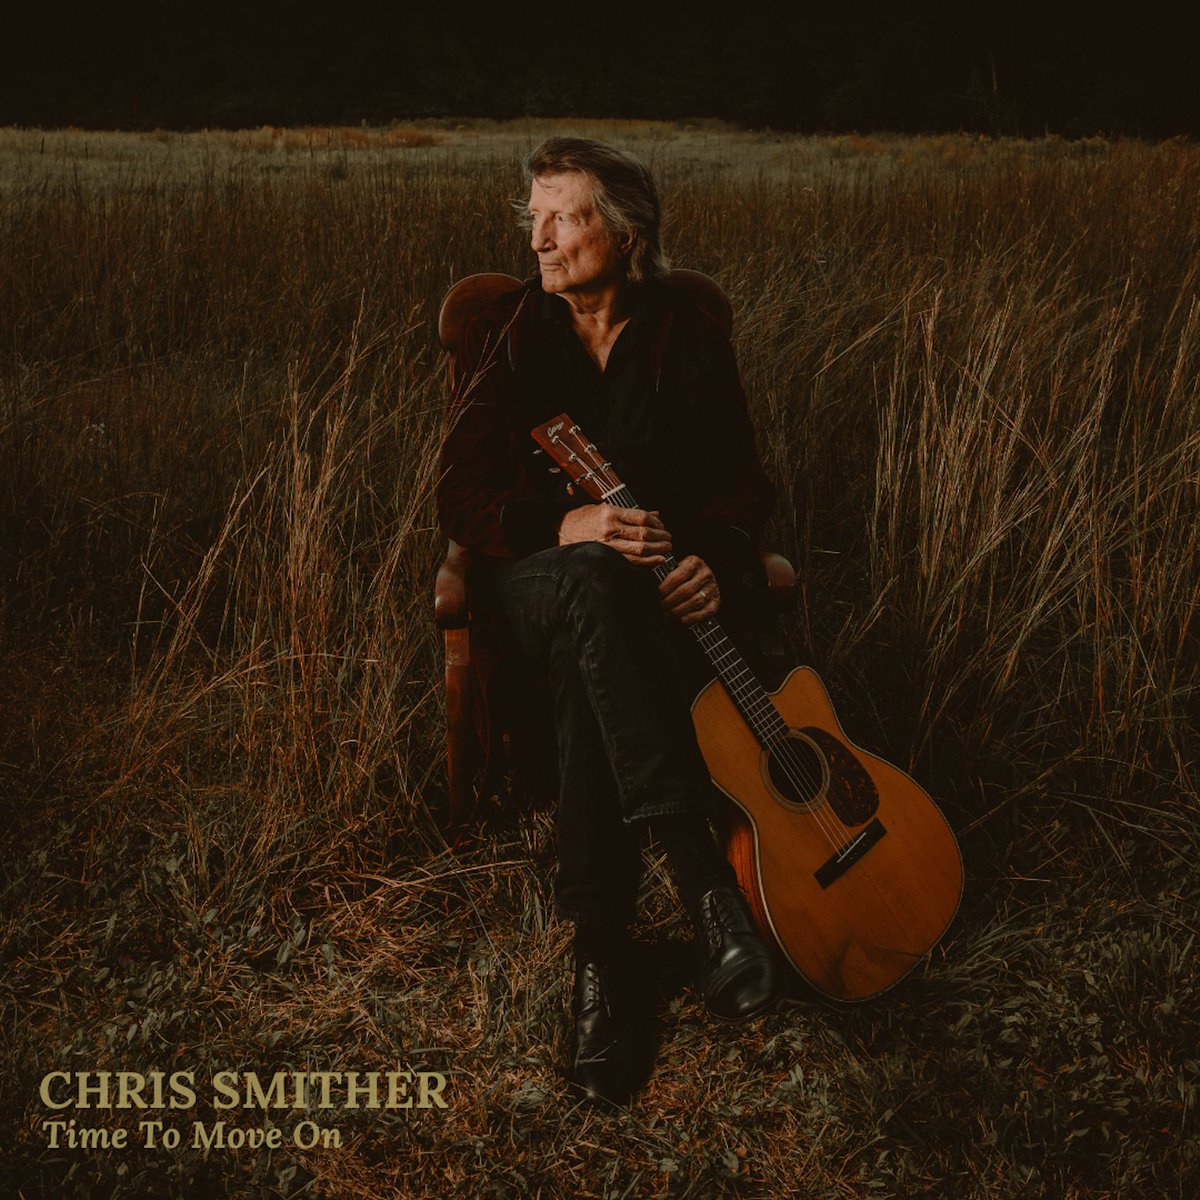 'With Smither at the helm, the song is given a fresh perspective and sound with his loping acoustic folk and gorgeously wise folk vocals.' - @glidemag Listen to @ChrisSmither_'s new single 'Time To Move On' #nowplaying here: smither.lnk.to/time